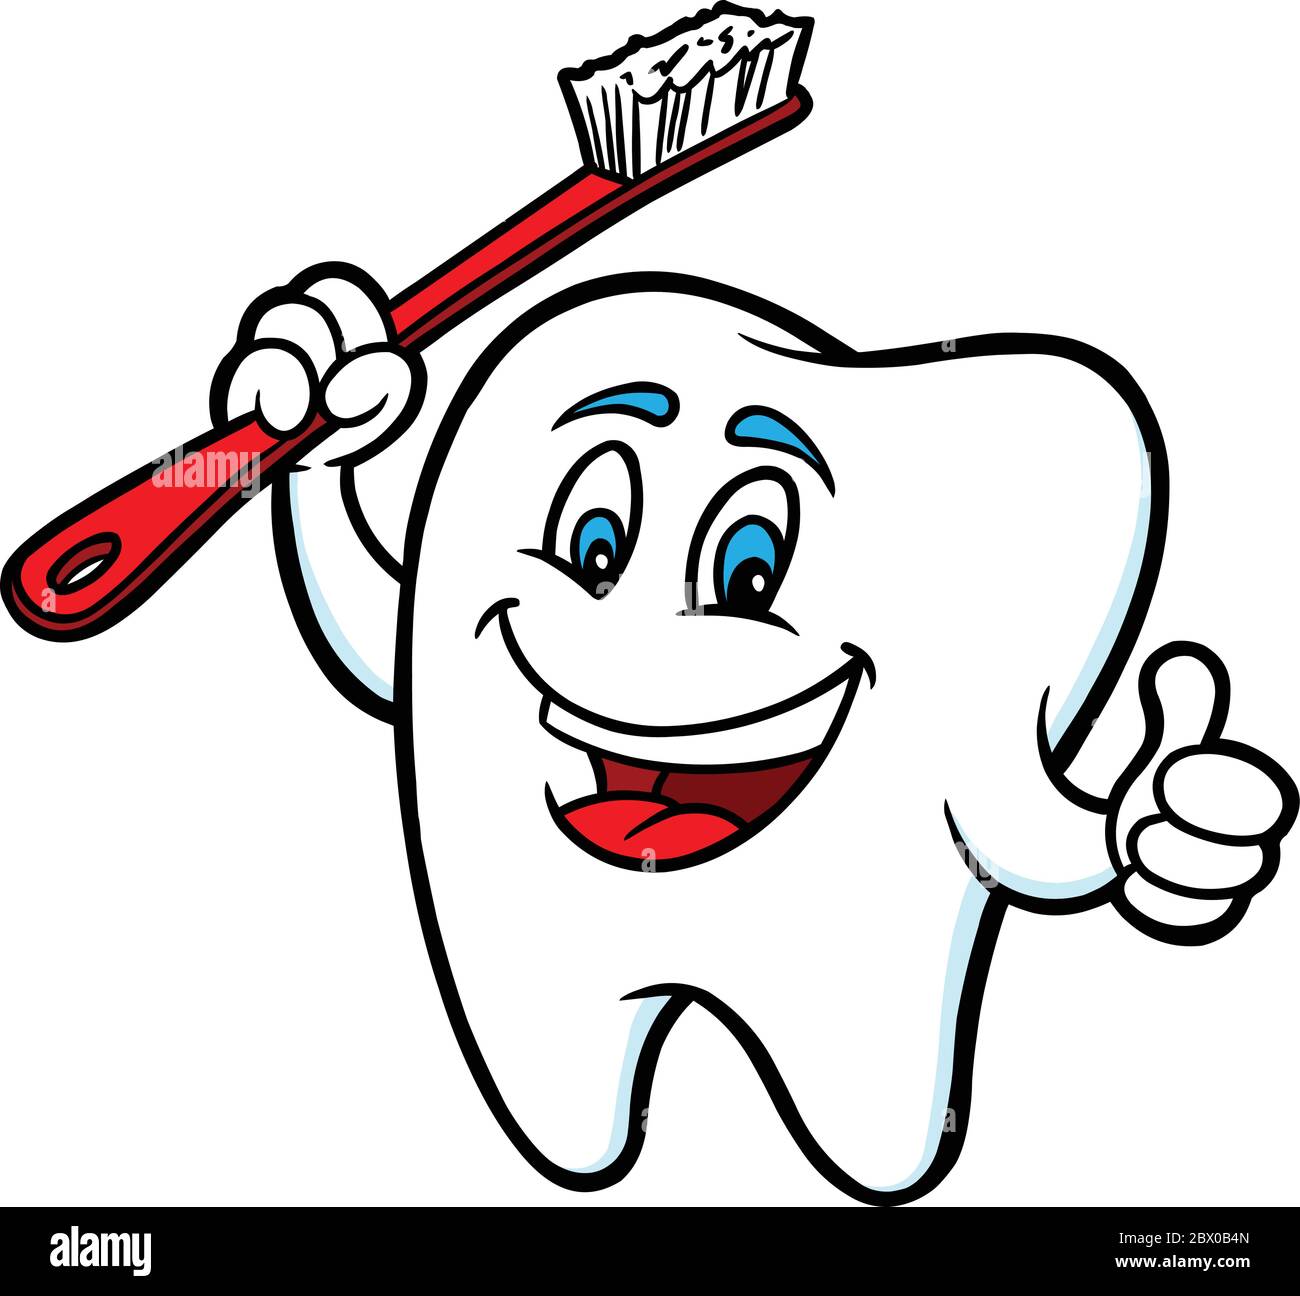 Tooth Mascot- A Cartoon Illustration of a Tooth Mascot. Stock Vector